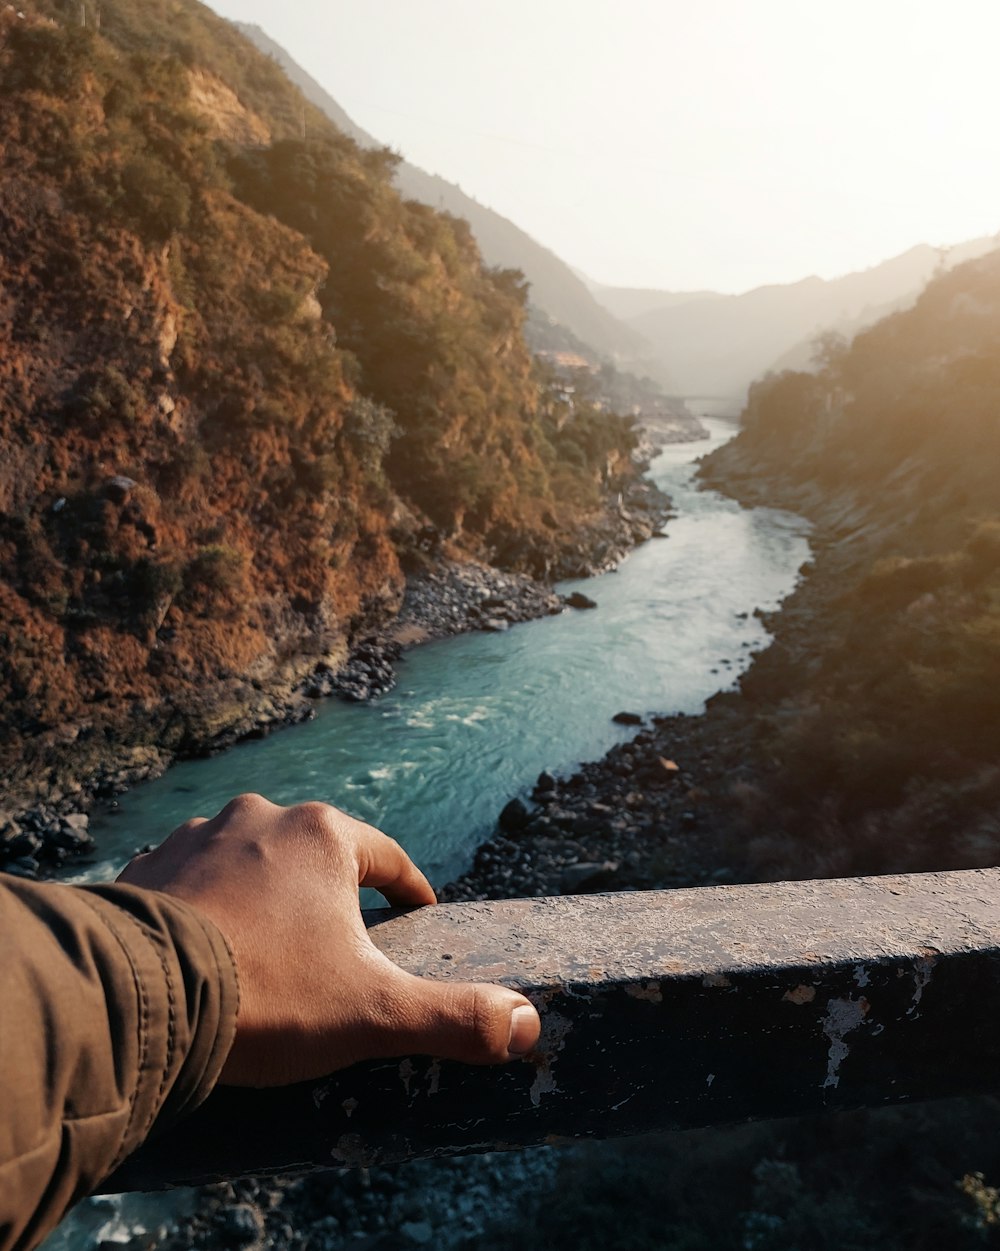 a person's hand on a railing overlooking a river